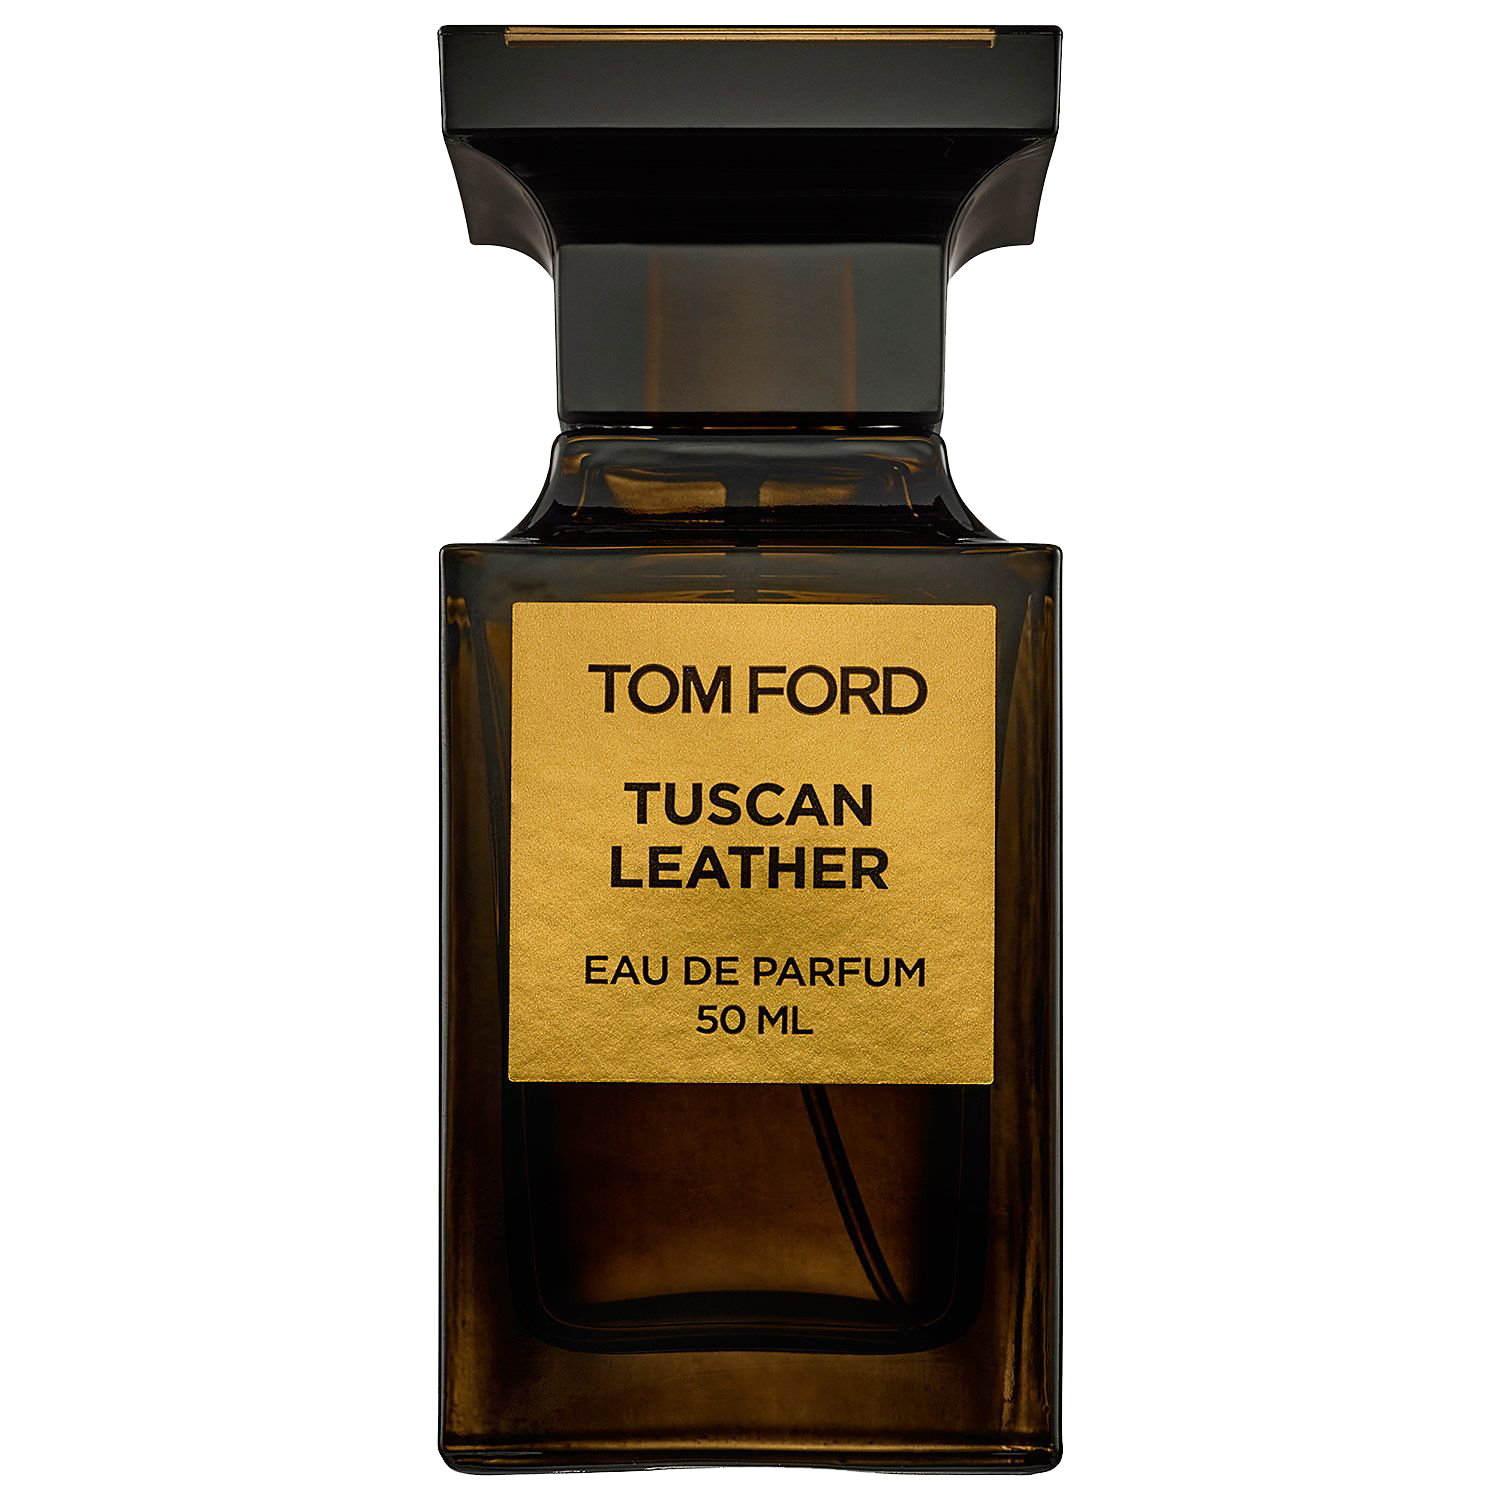 Top 42+ imagen tuscan leather tom ford